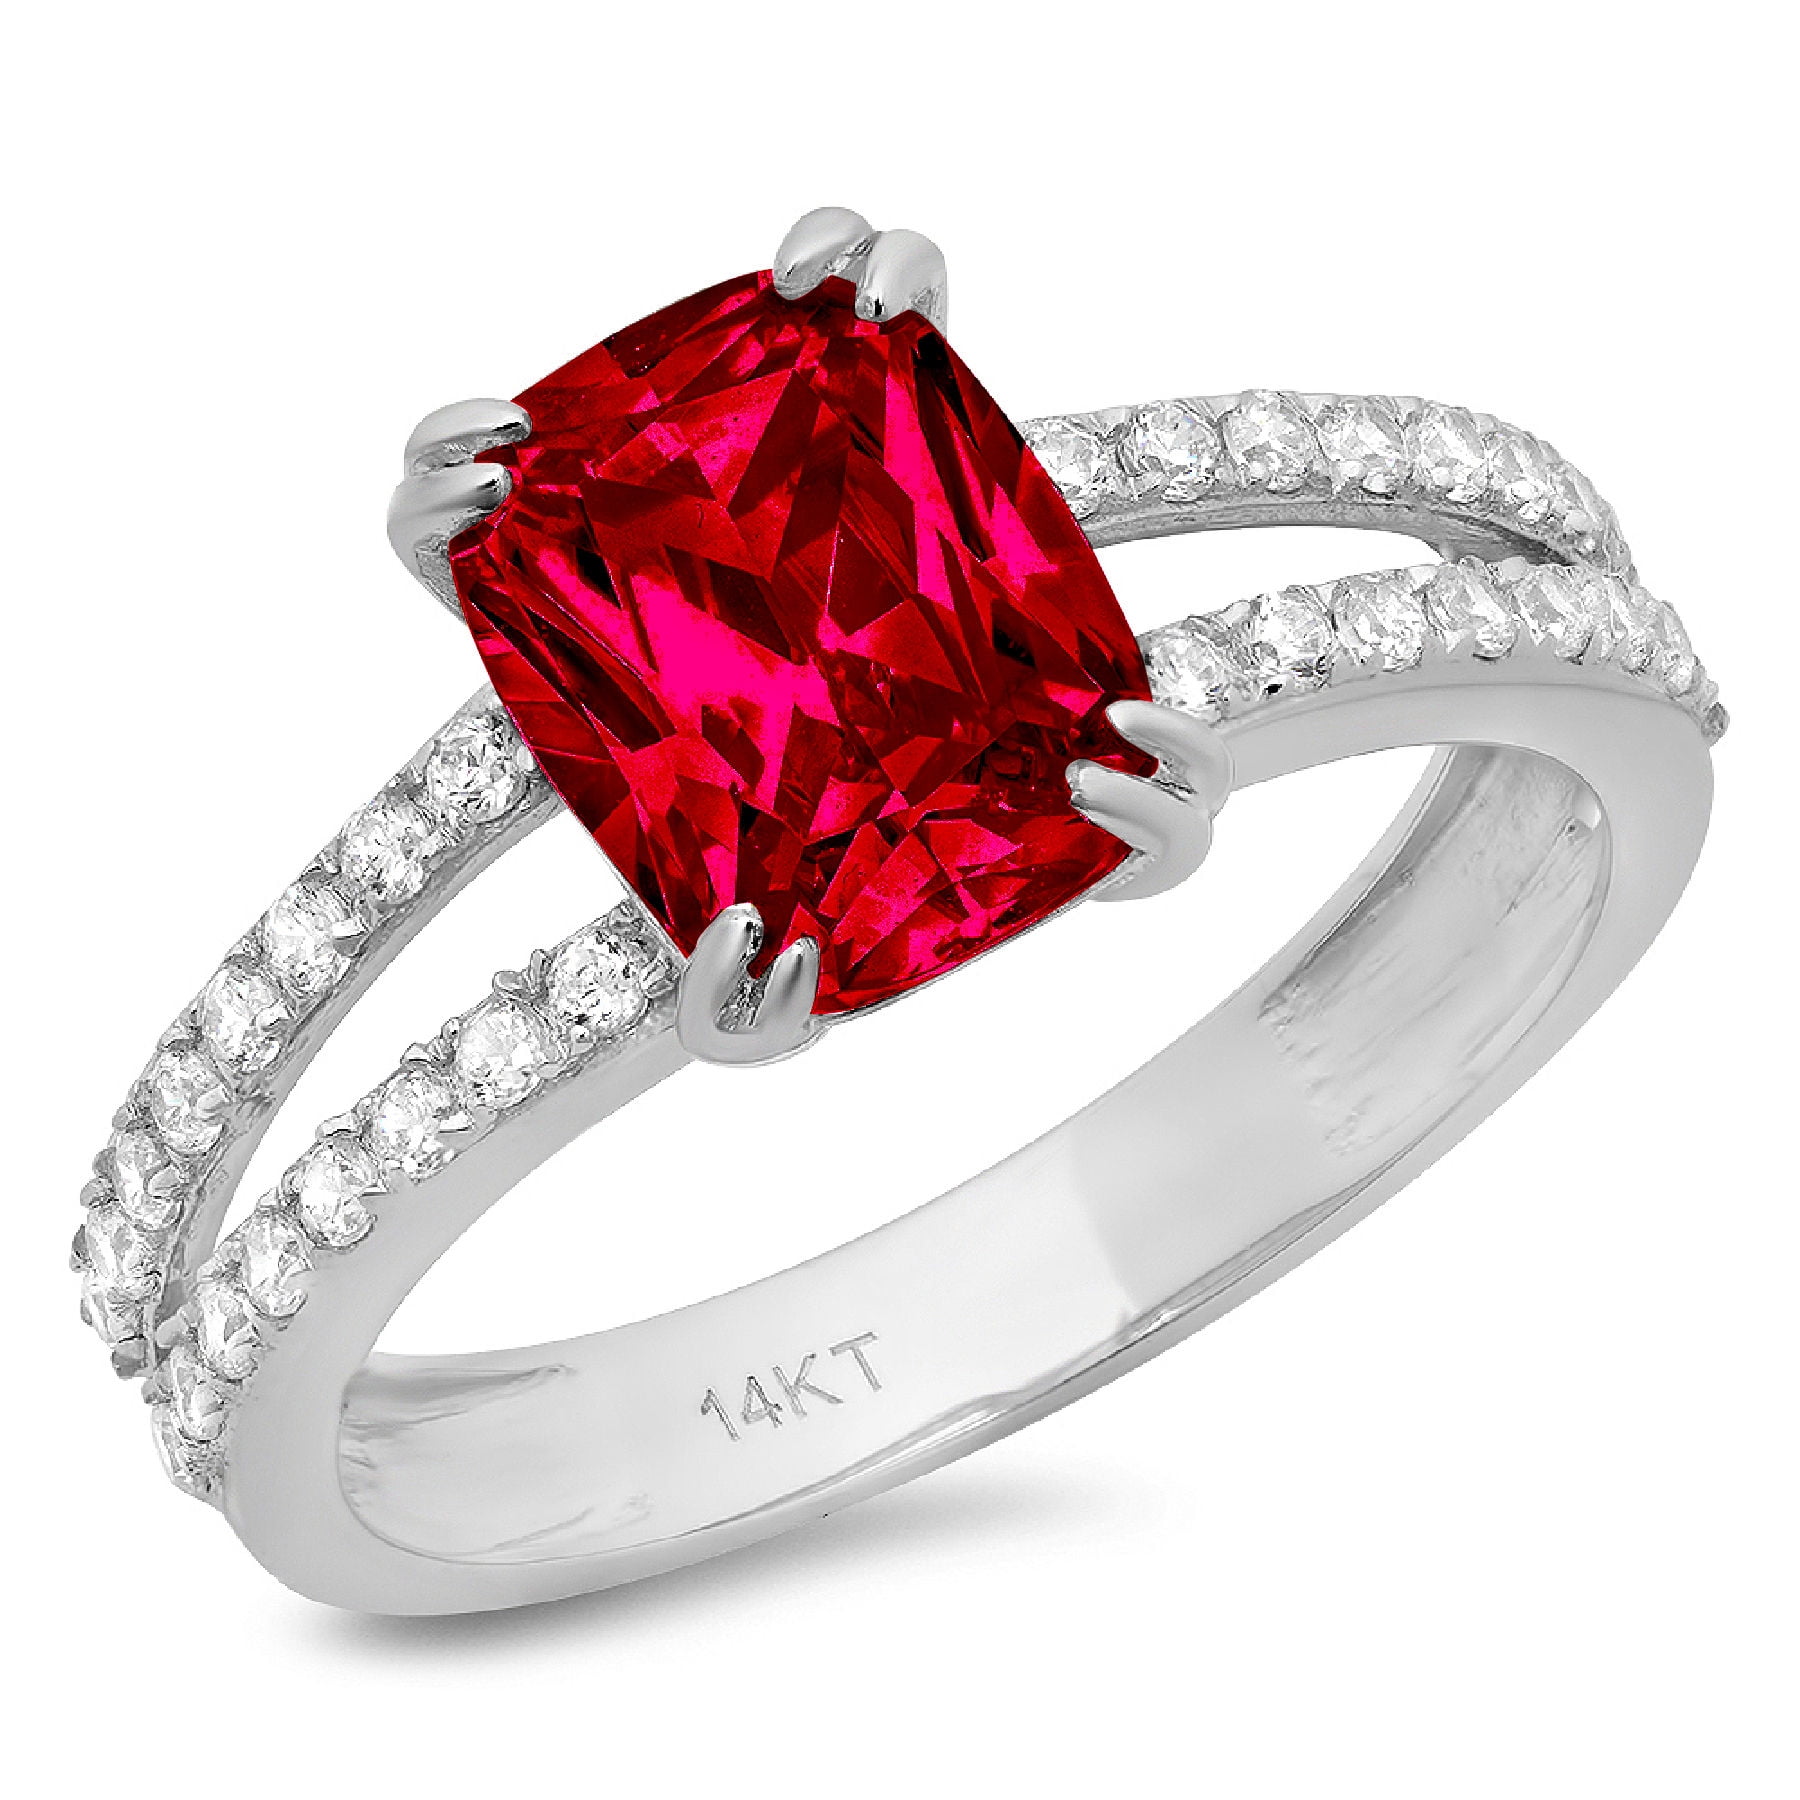 Red Ruby Brilliant Round Sterling Silver Engagement Wedding Ring Set 2.35 Ctw 